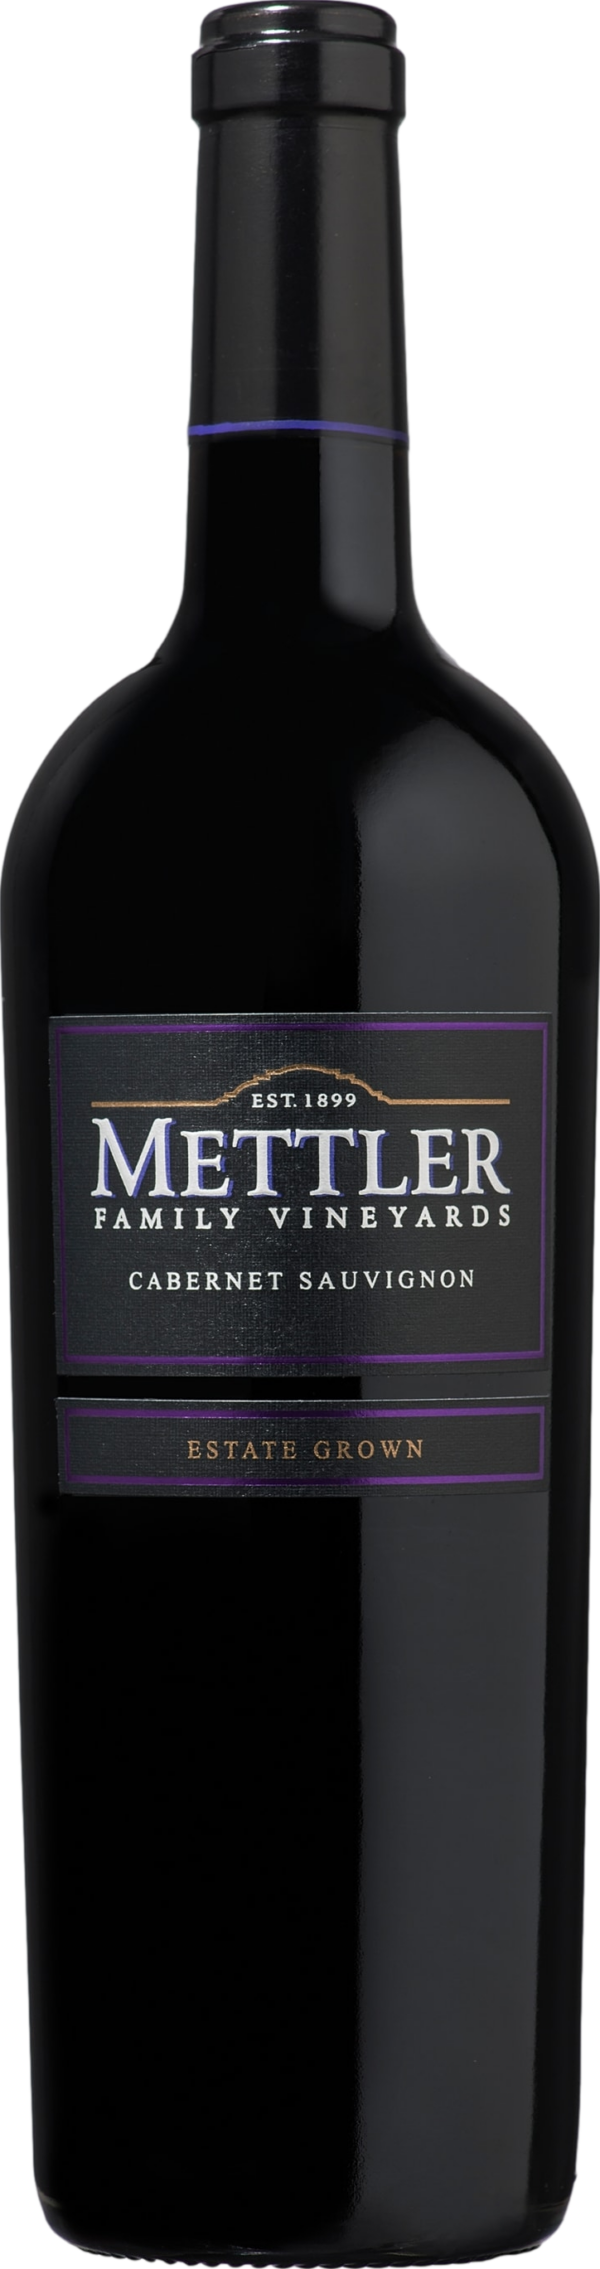 Product image of Mettler Cabernet Sauvignon 2020 from 8wines